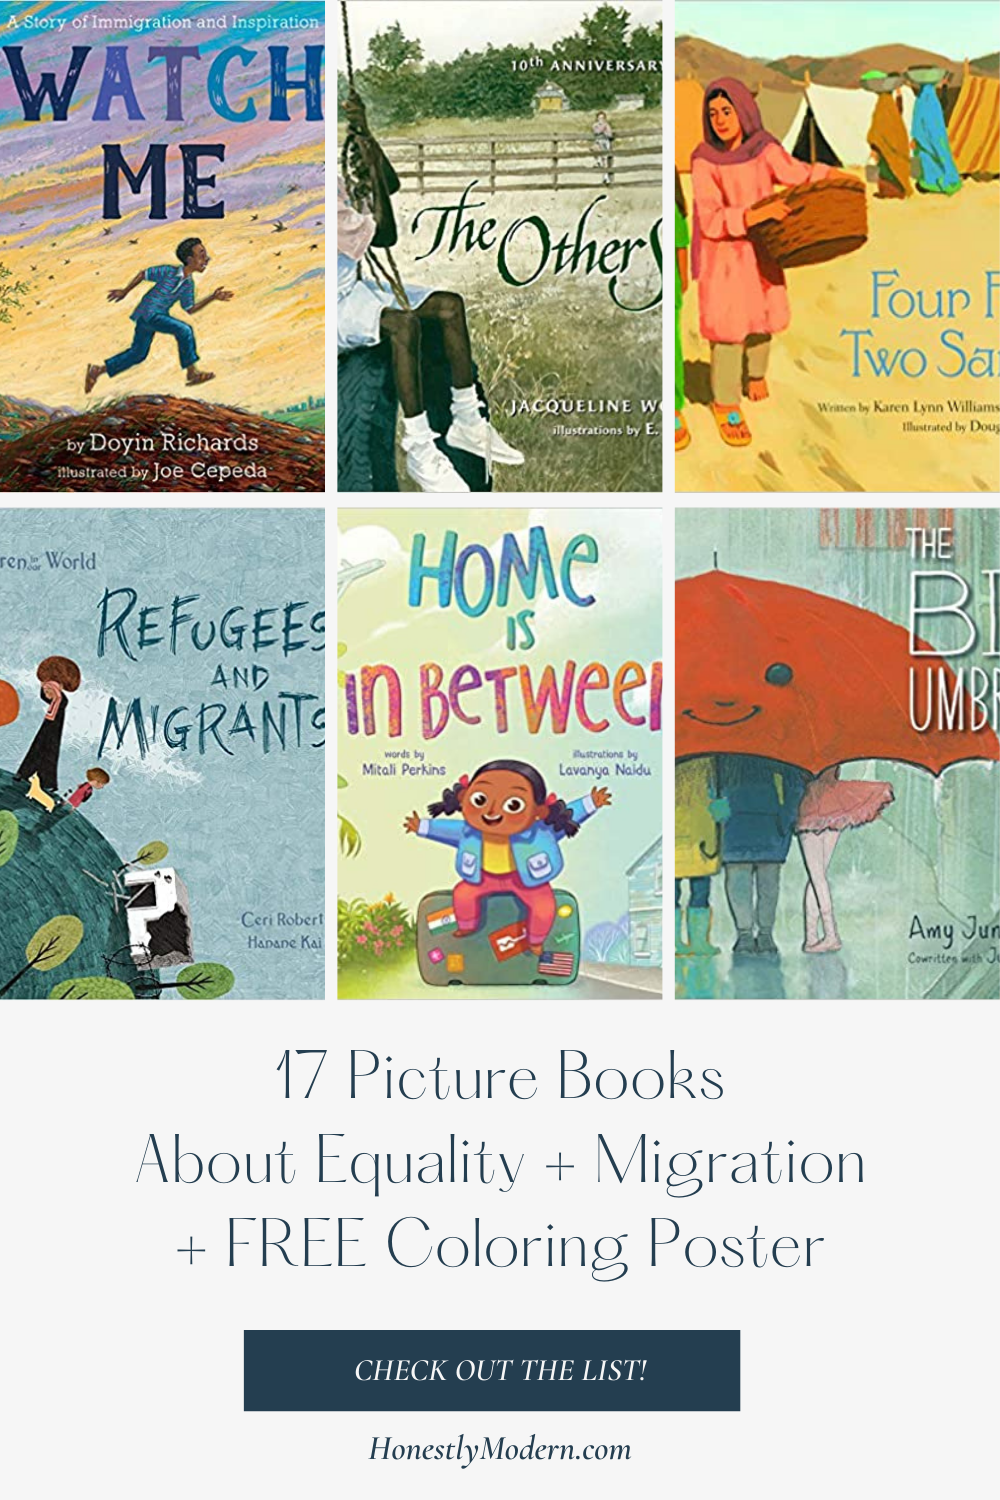 Reduced Inequalities | Picture Book List For United Nations Sustainable Development Goal #10